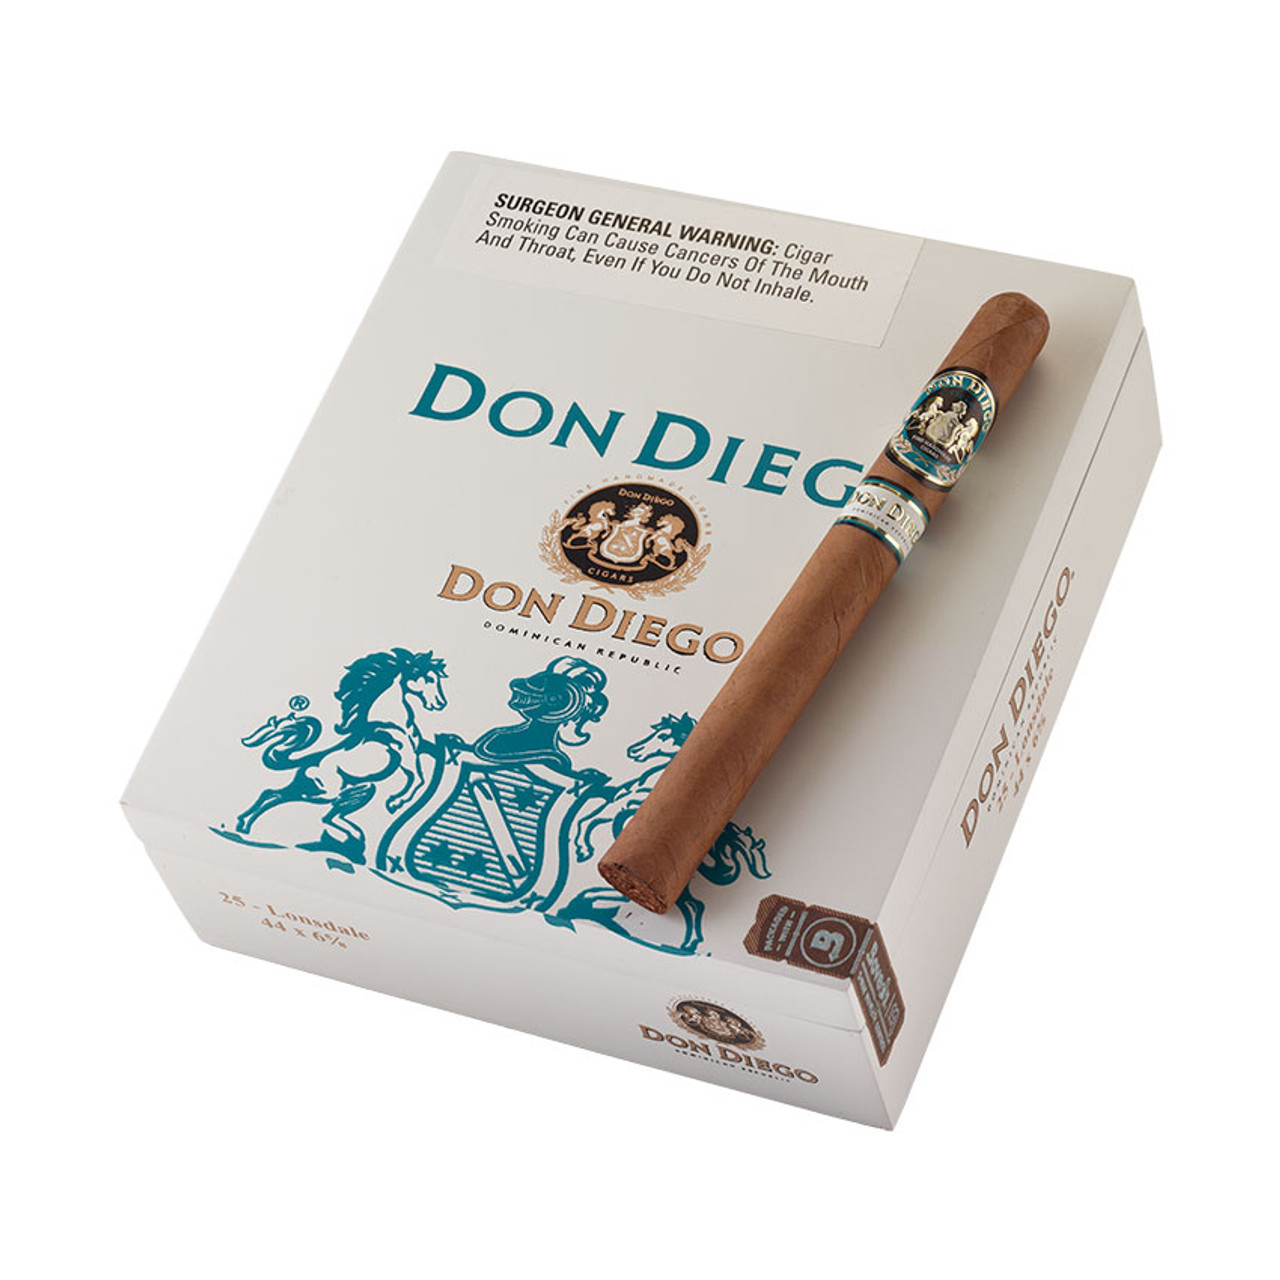 Don Diego Lonsdale Cigars - 6.62 x 42 (Box of 25) *Box